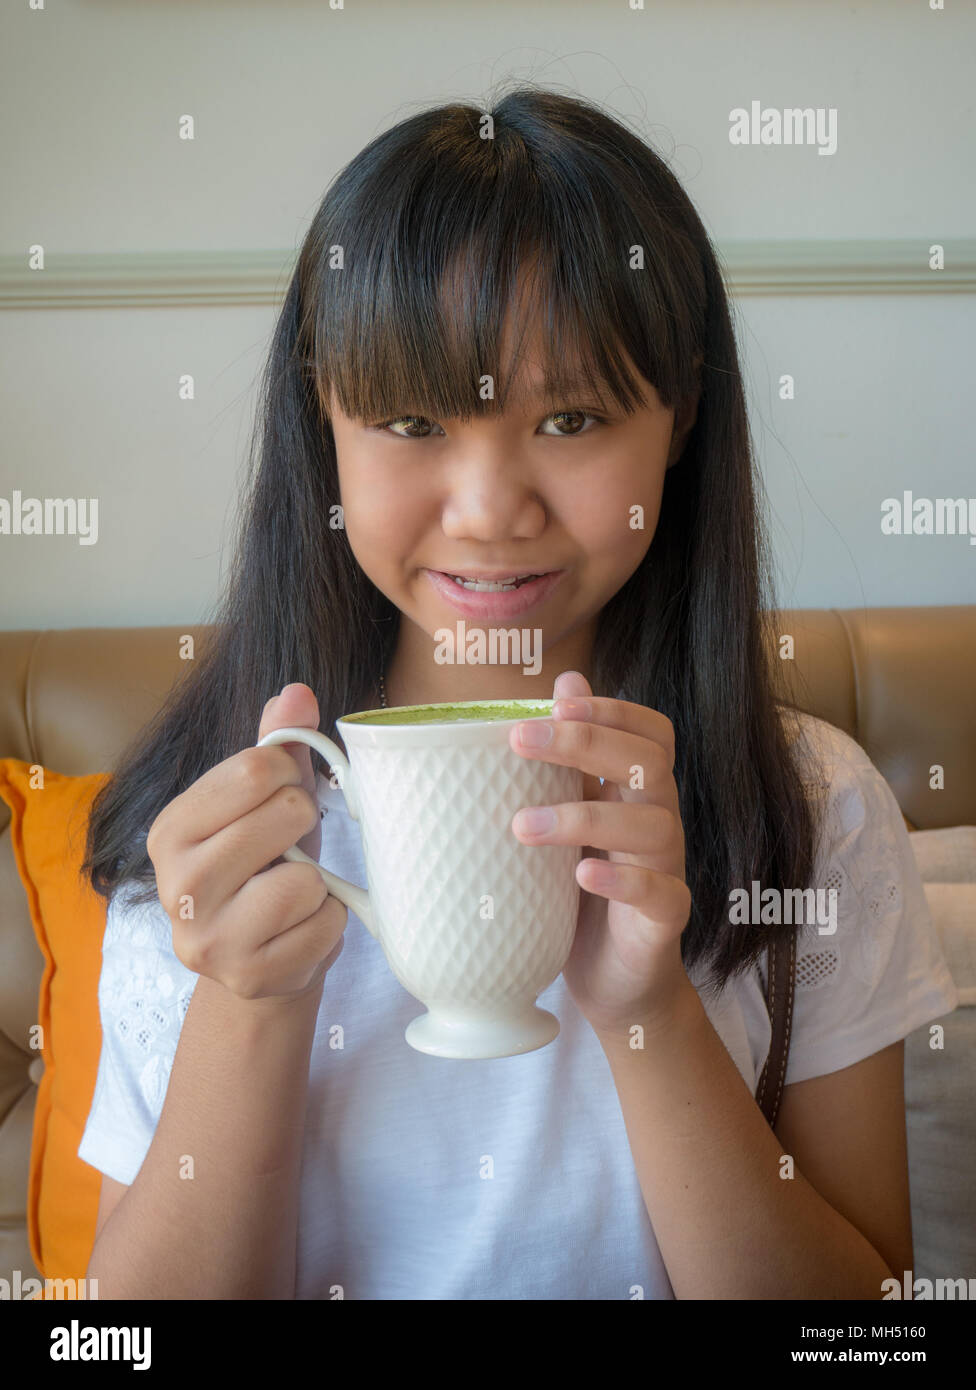 Asia teen hot Ask Amy: